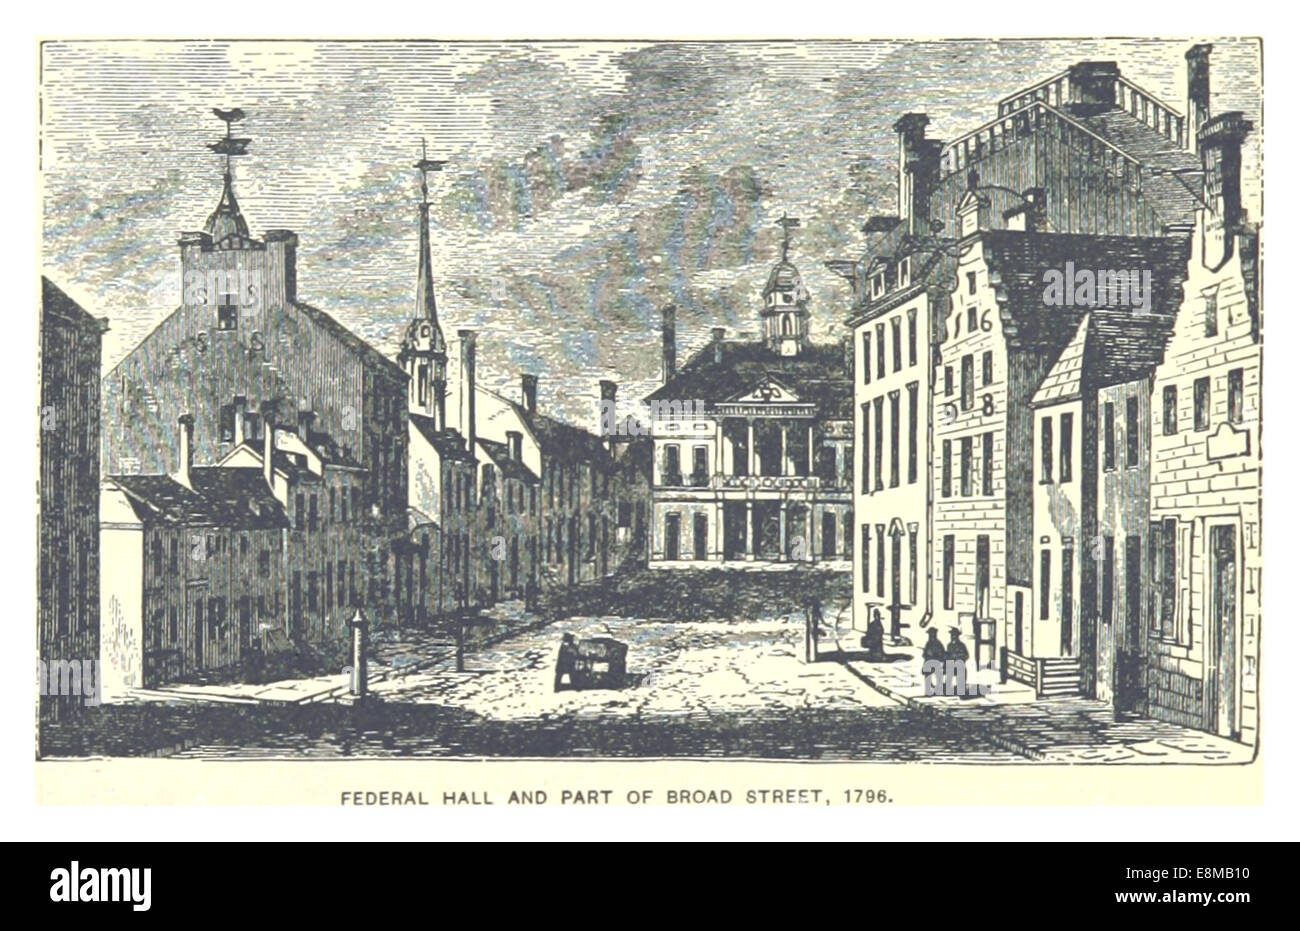 030 FEDERAL HALL AND PART OF THE BROAD STREET, 1796 Stock Photo